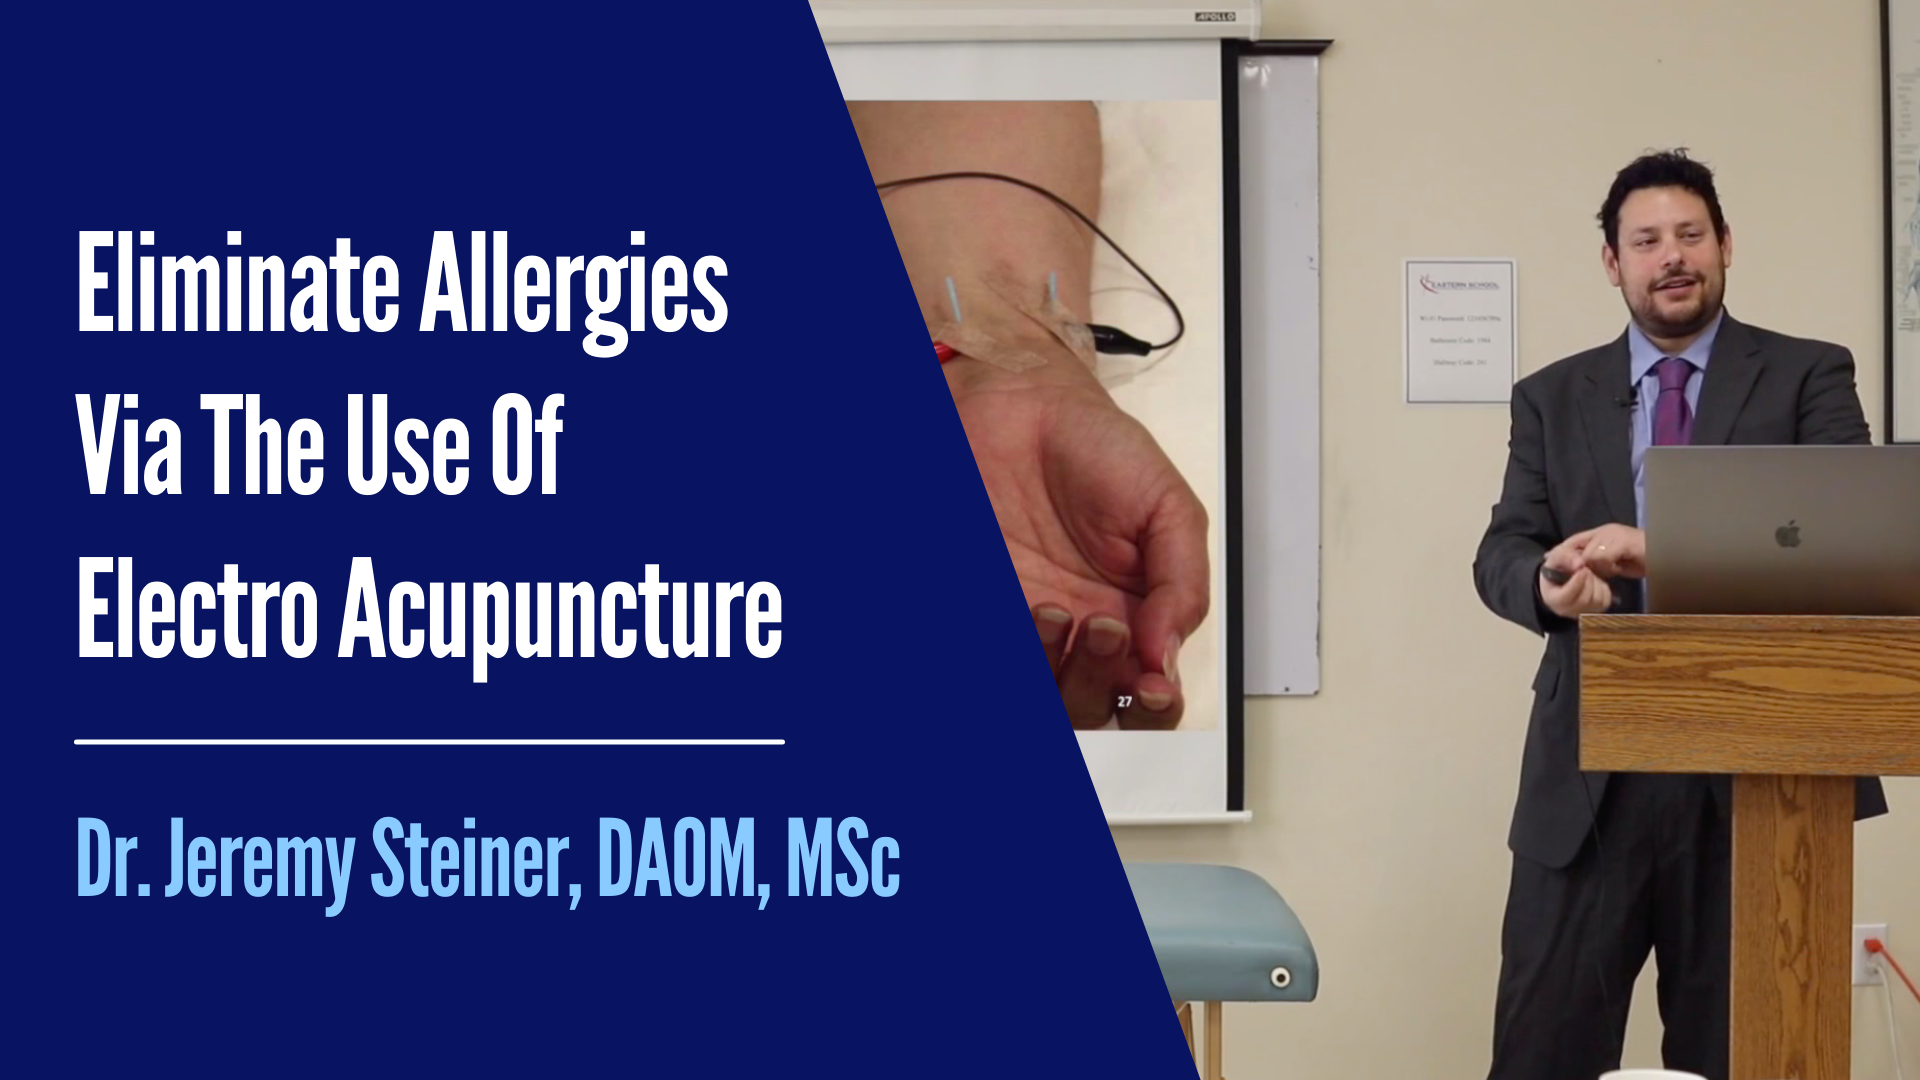 Eliminate Allergies Via The Use Of Electro Acupuncture